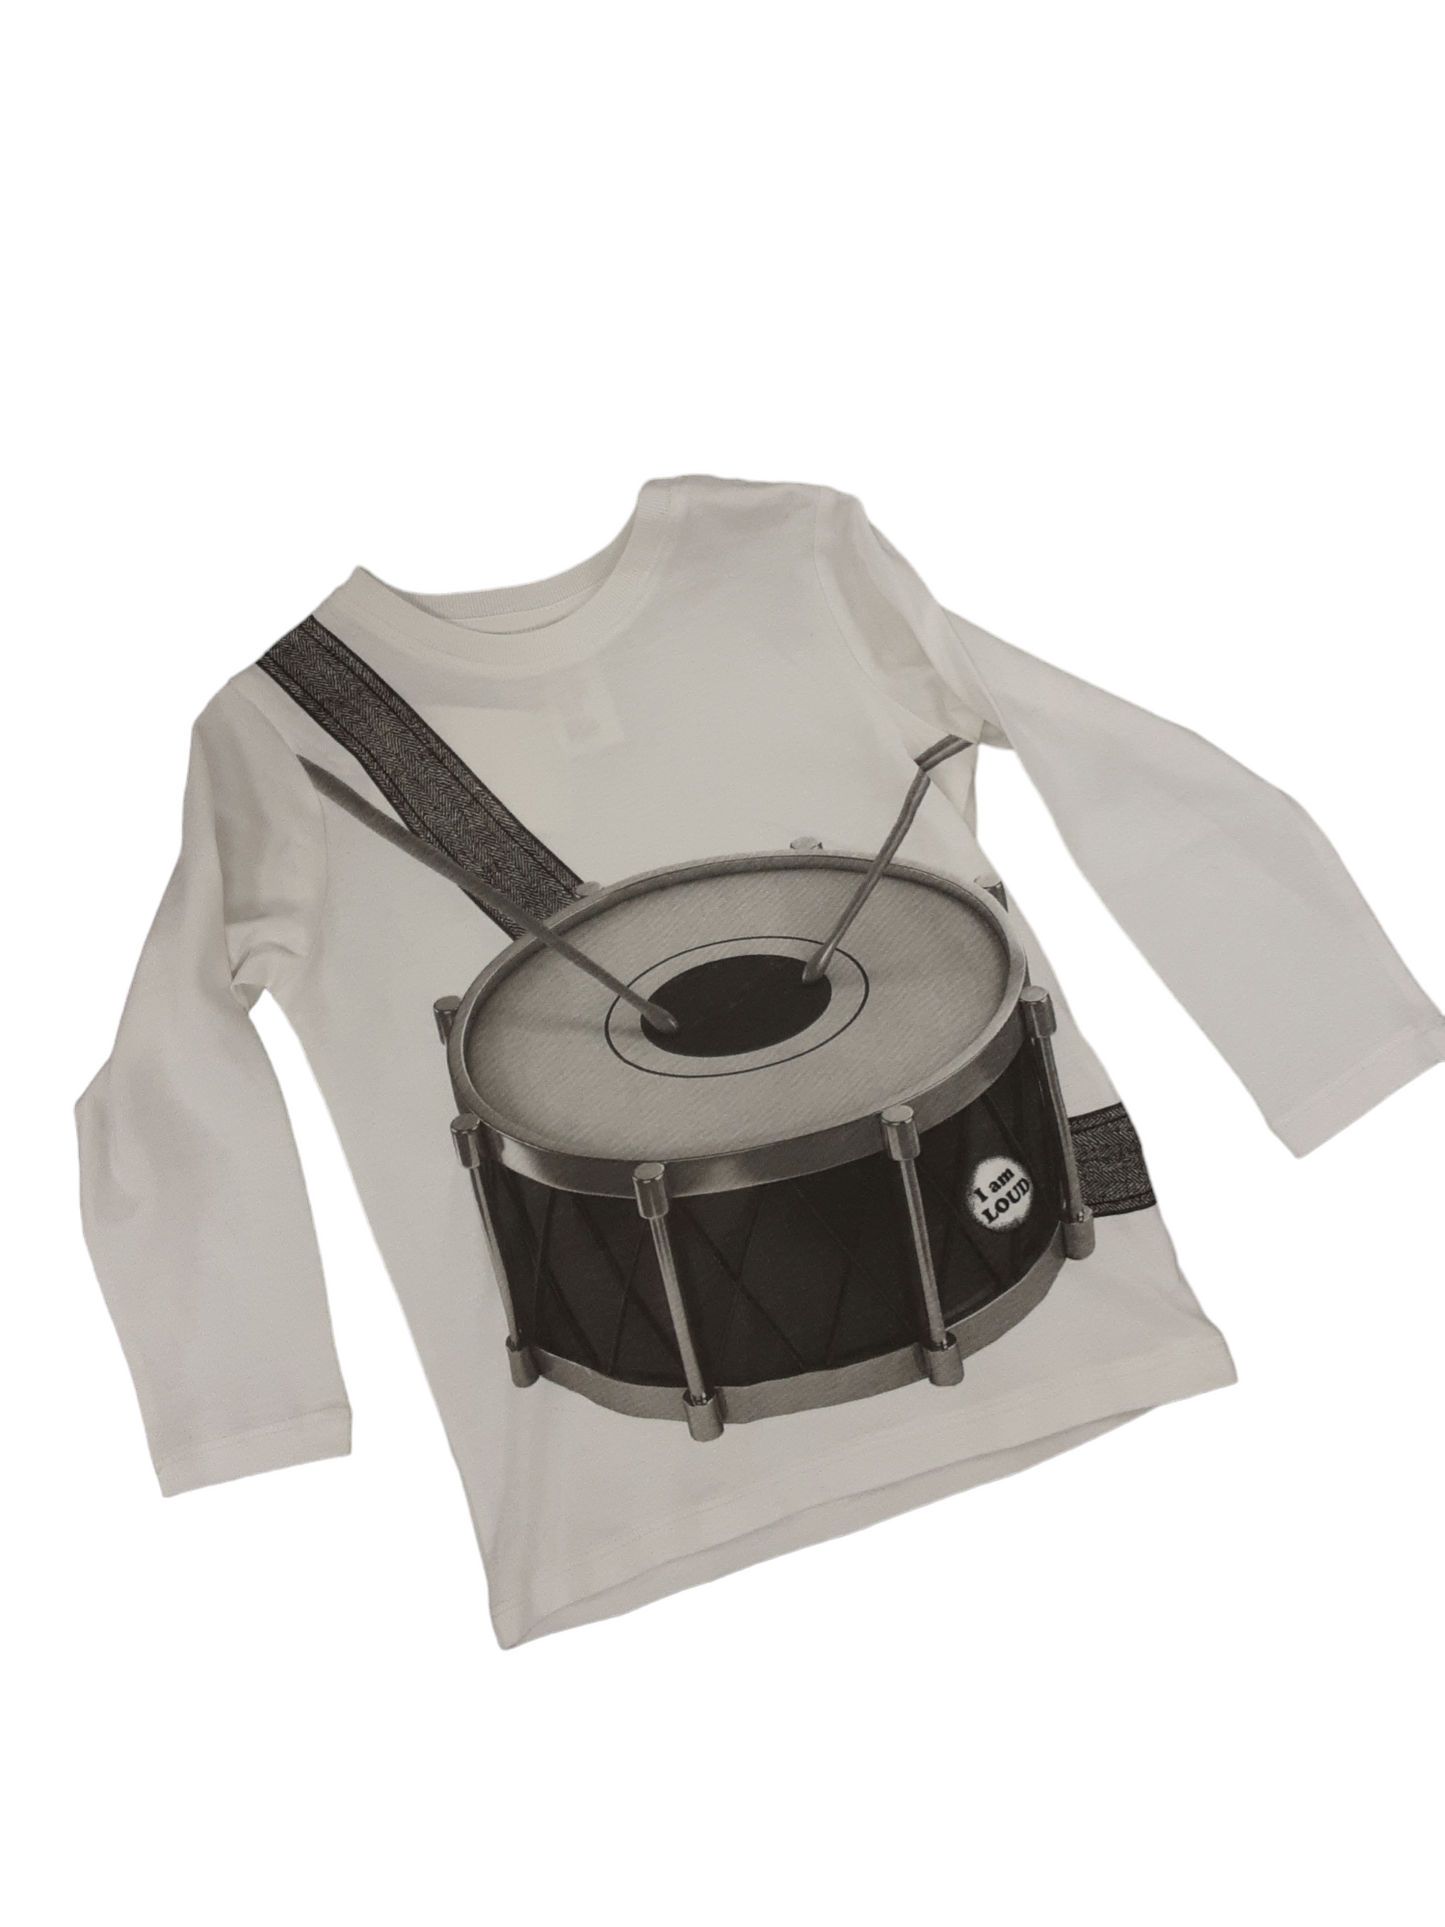 Drummer long sleeve size 12 to 18 months